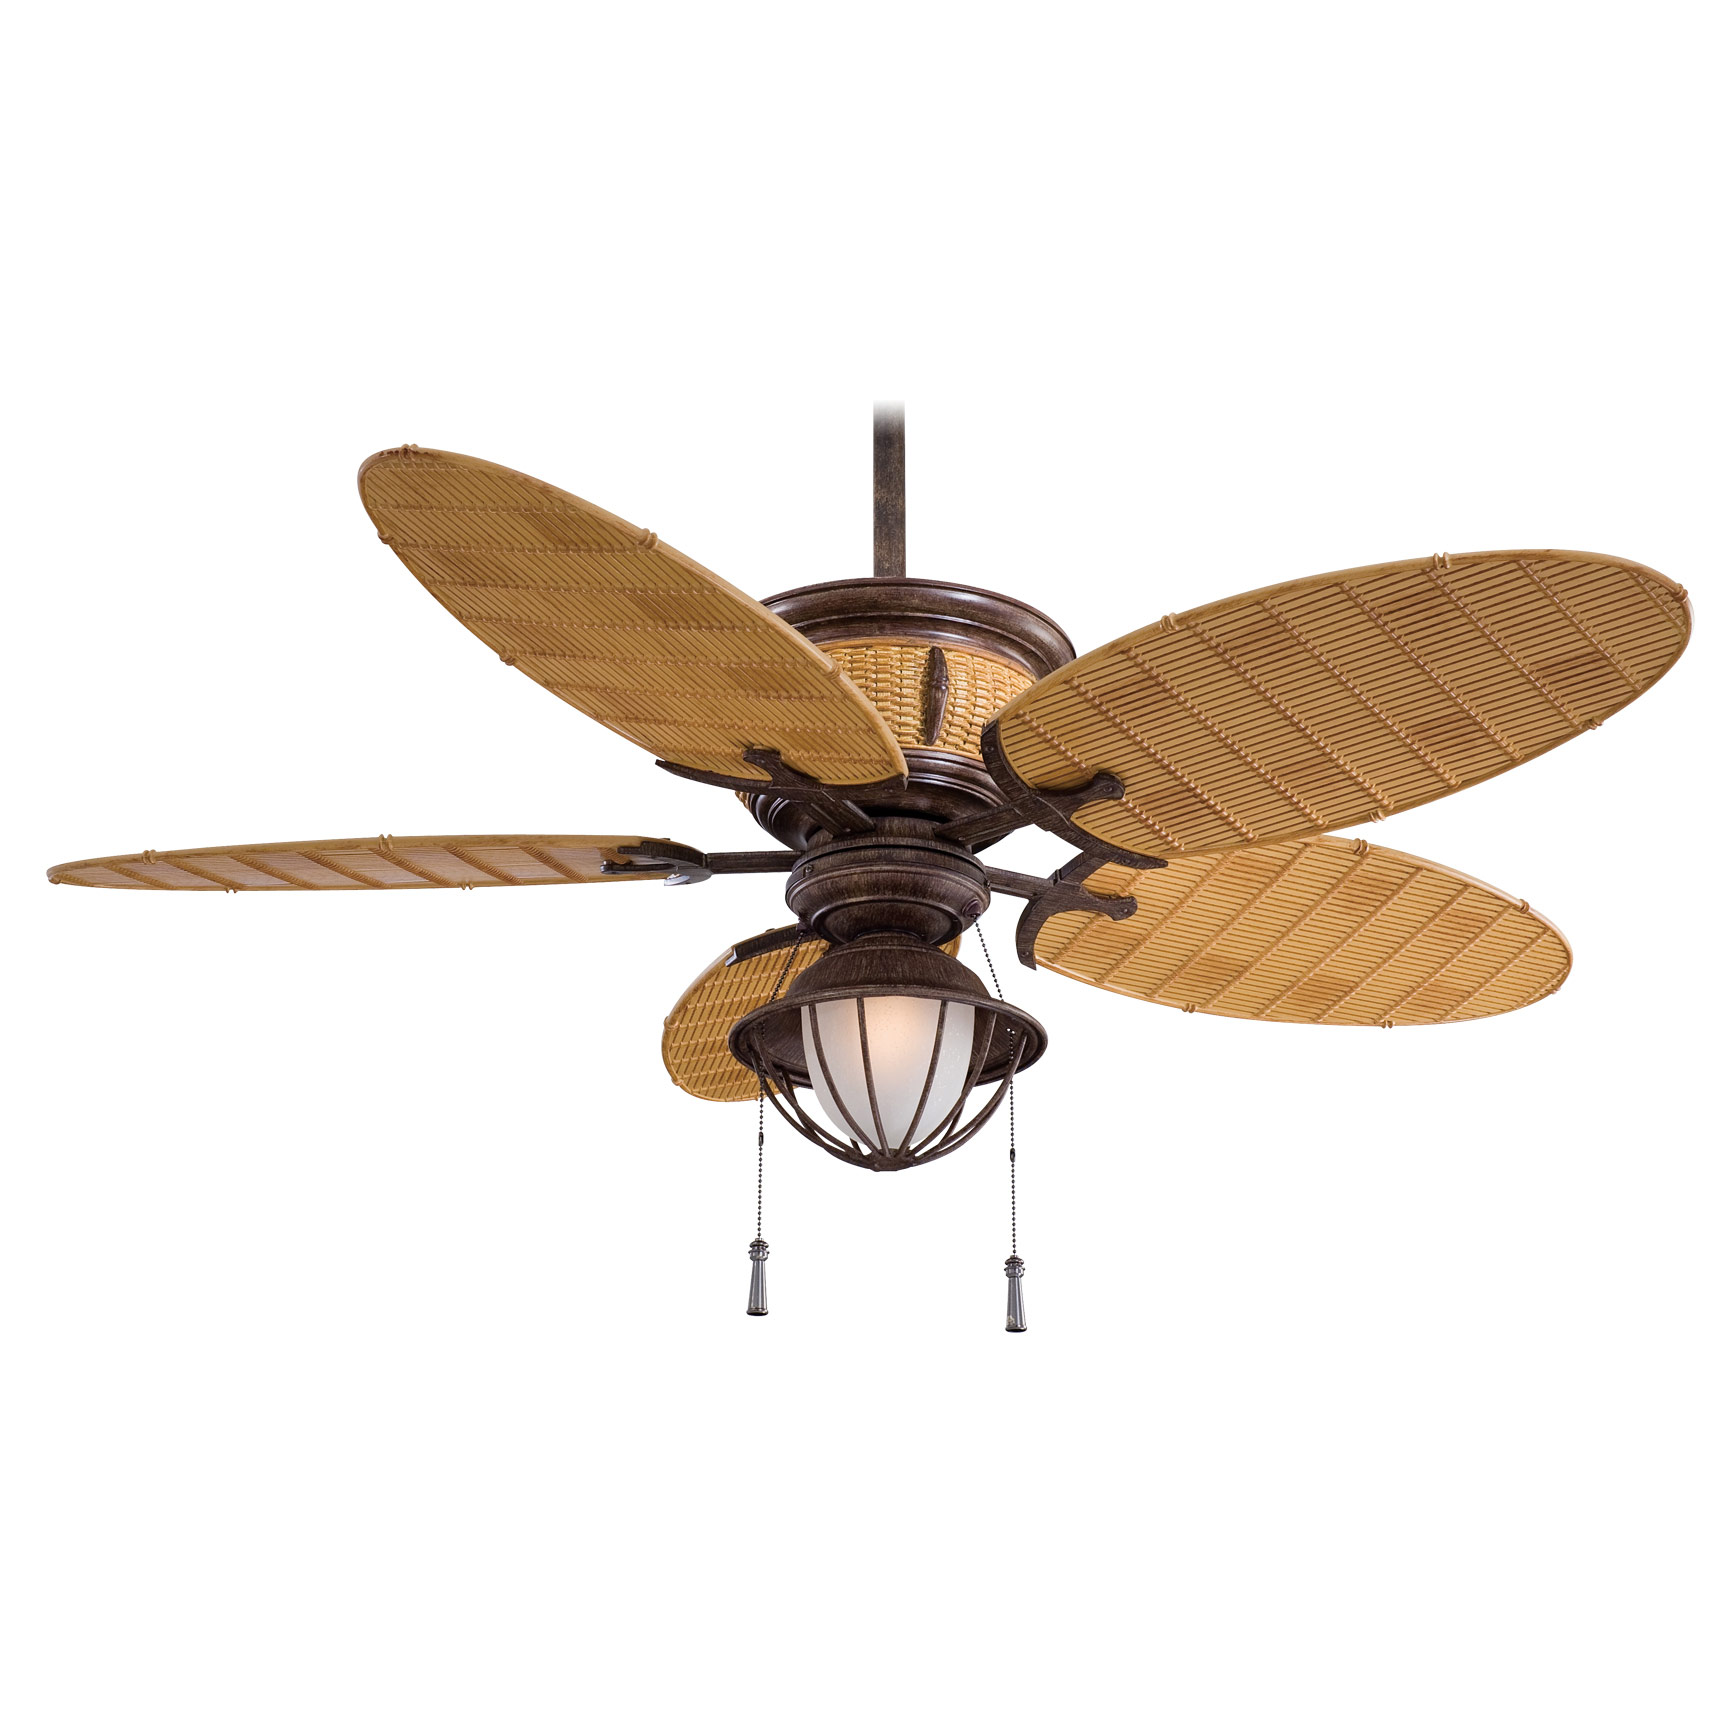 Shangri La Outdoor Ceiling Fan With Light By Minka Aire F580 Vr Bb